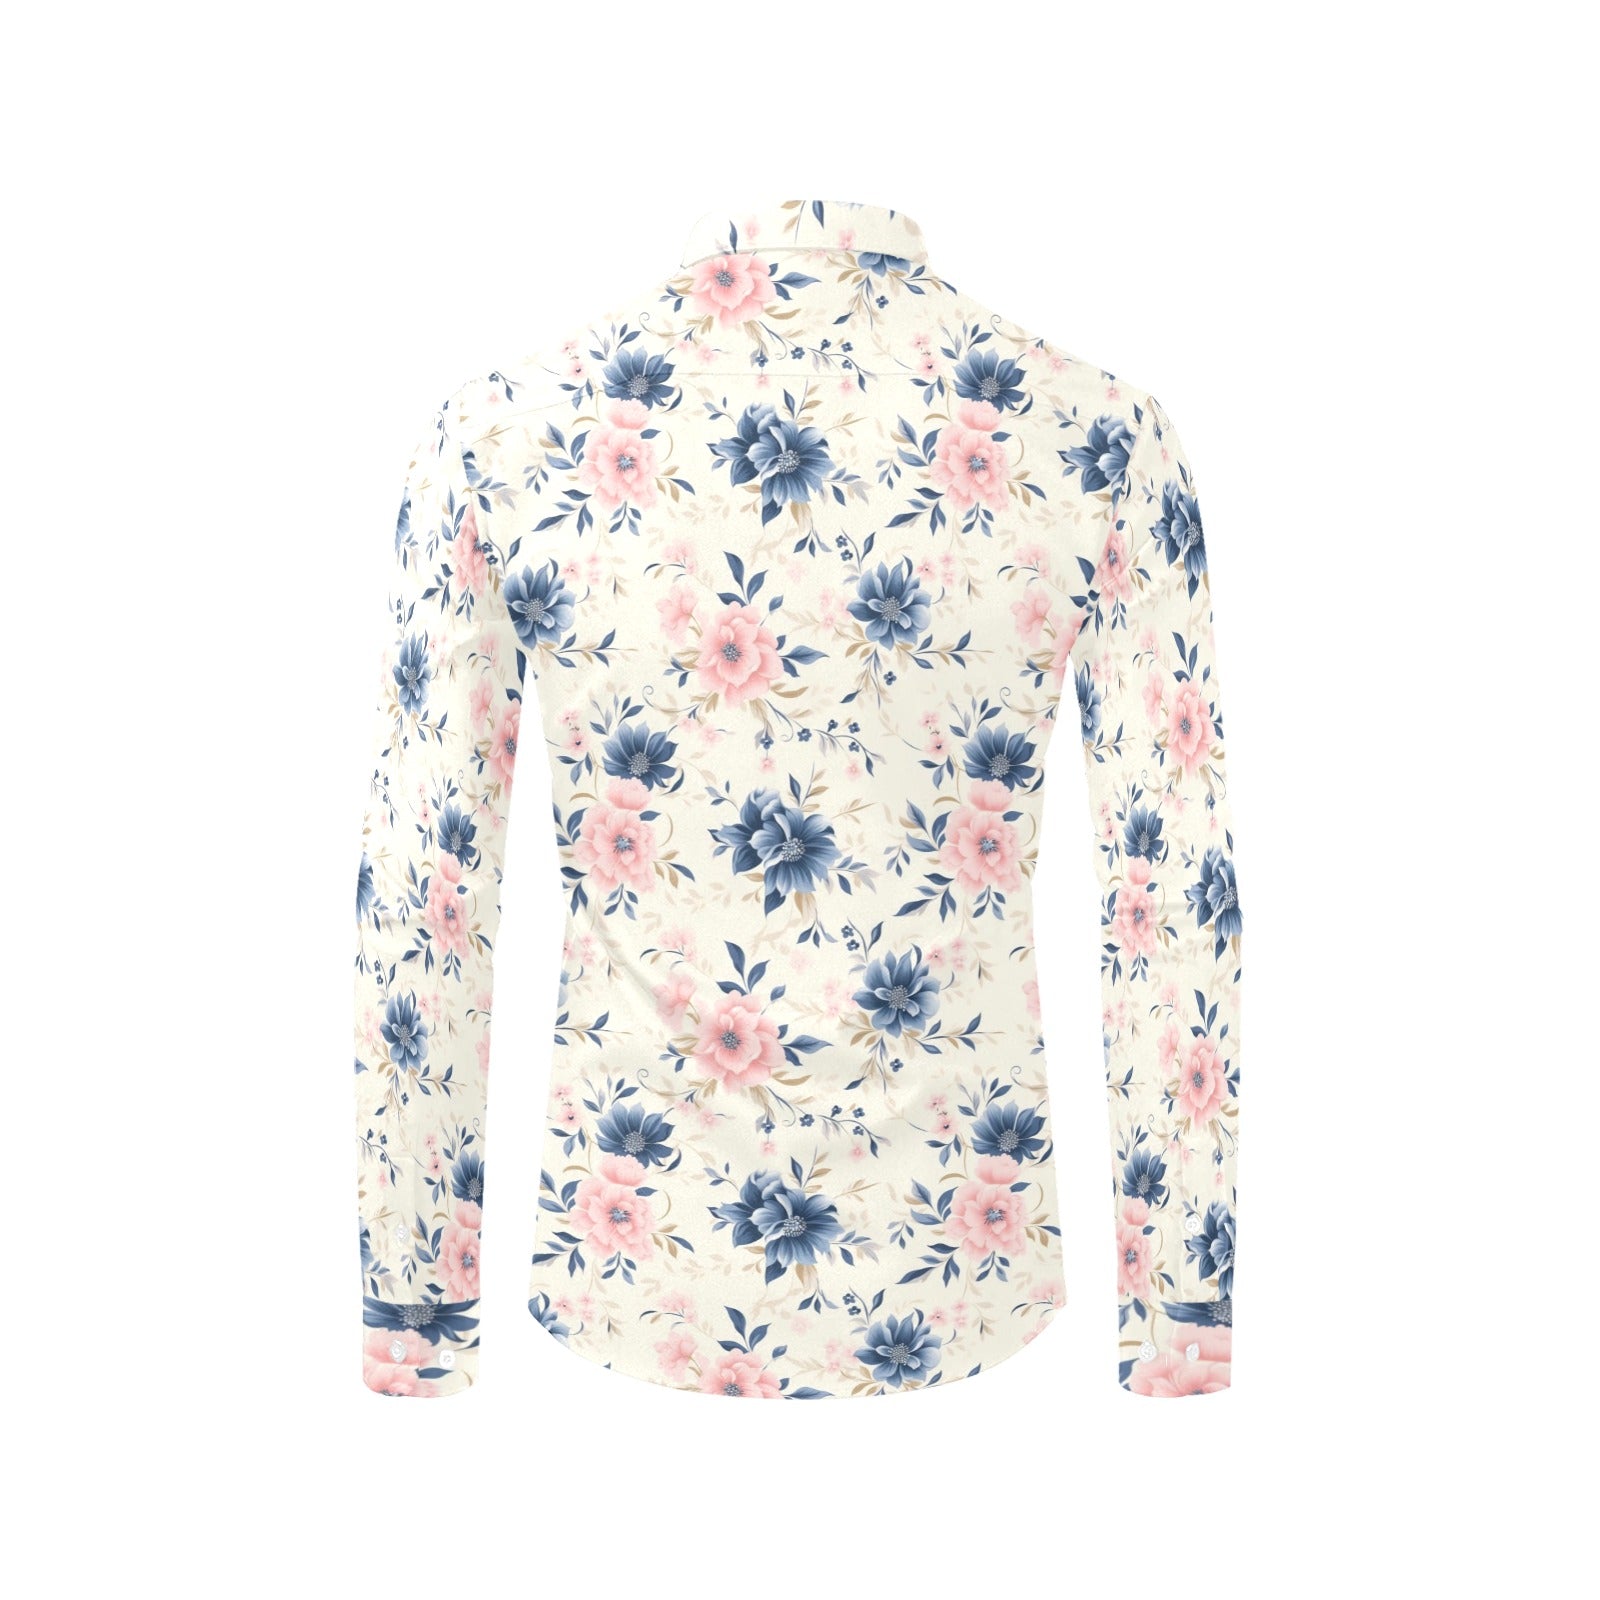 Pink Blue Floral Long Sleeve Men Button Up Shirt, White Flowers Print White Casual Buttoned Collared Designer Dress Shirt with Chest Pocket Starcove Fashion